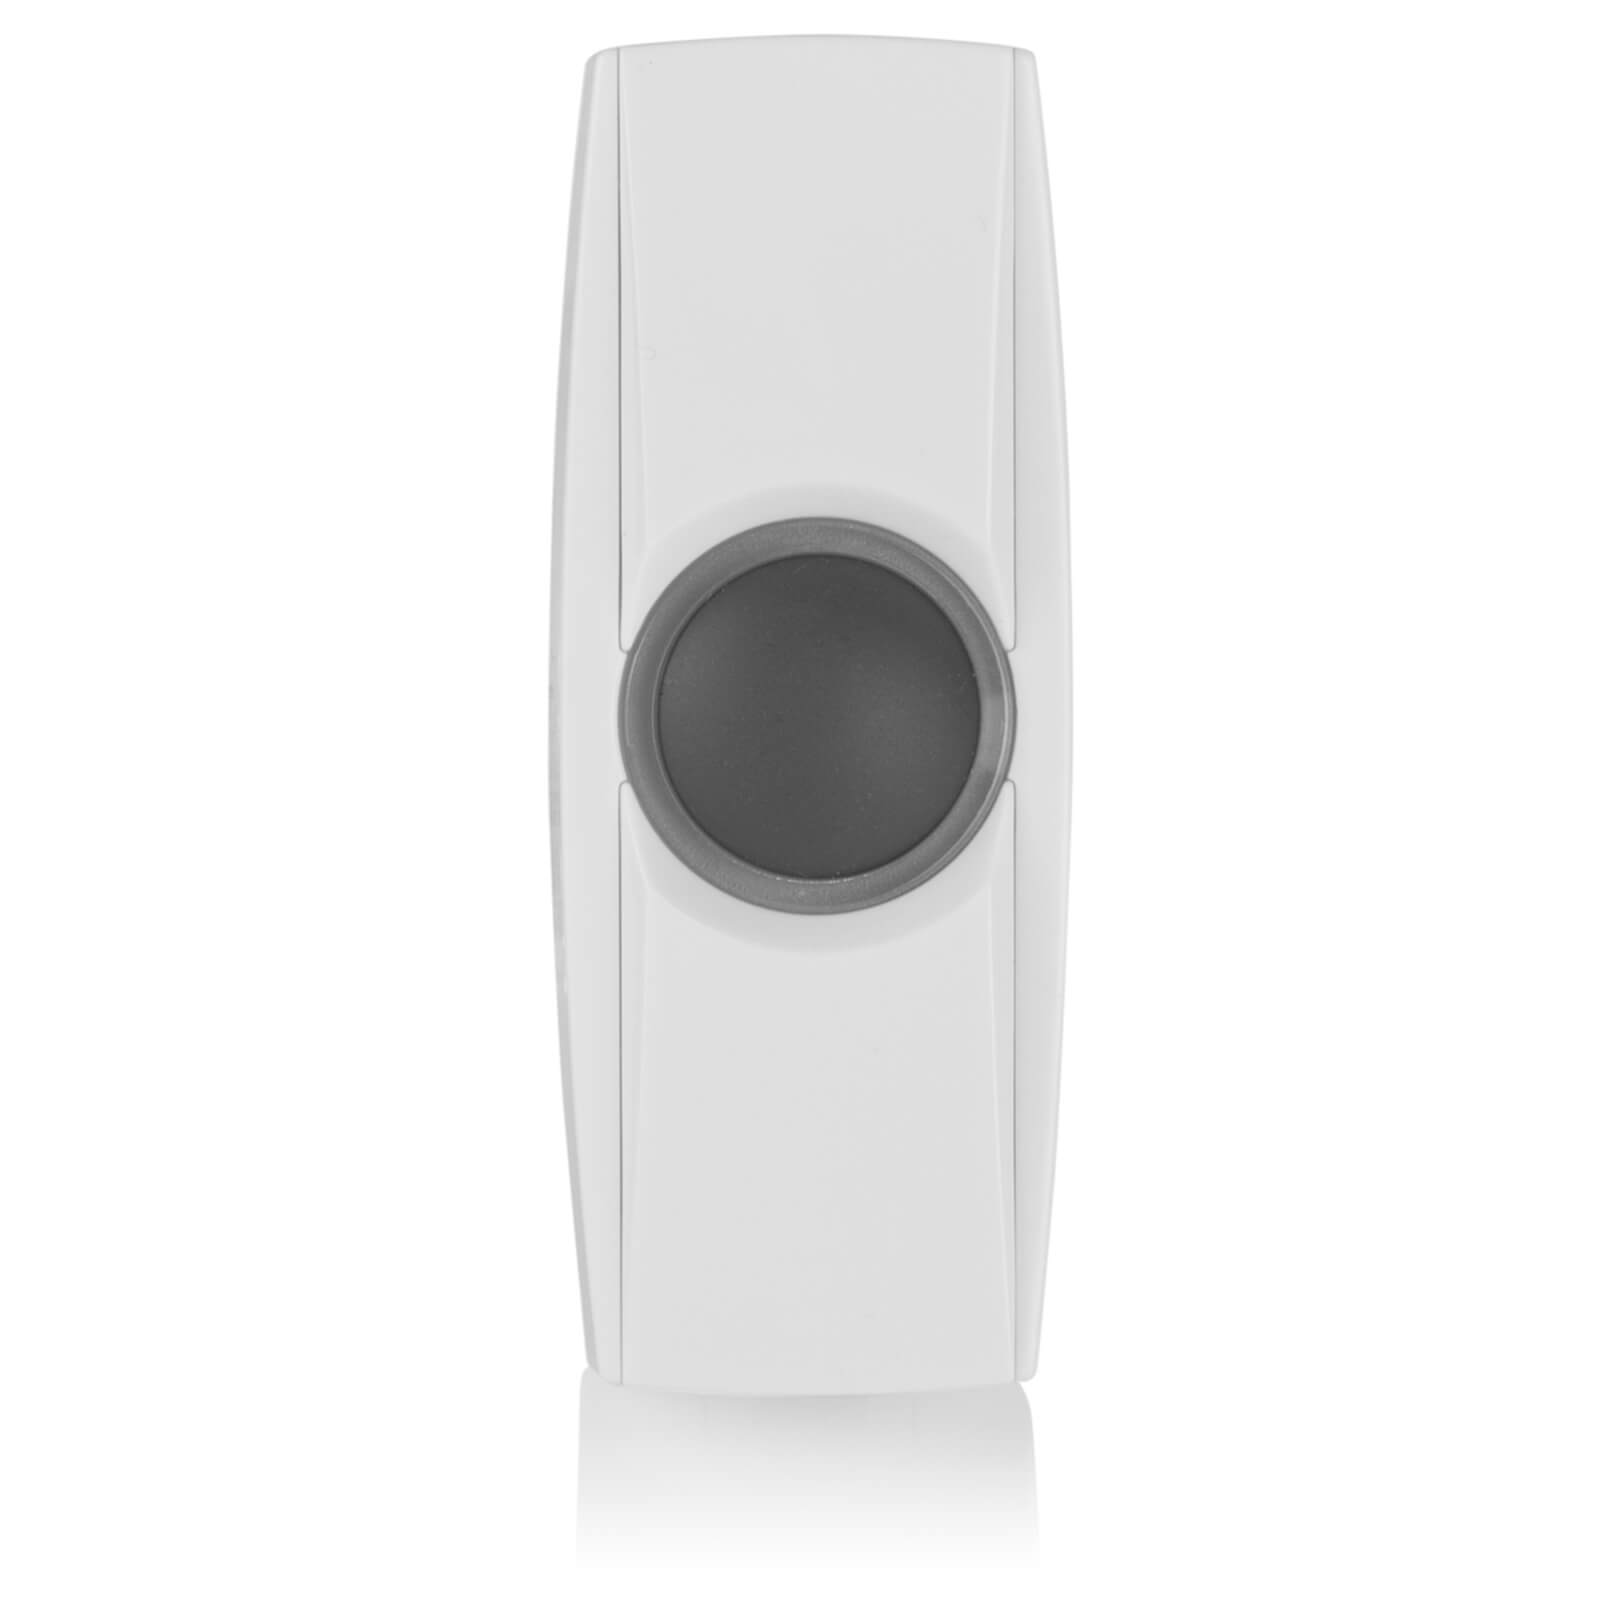 Byron BY34 Wireless Extra Push - White